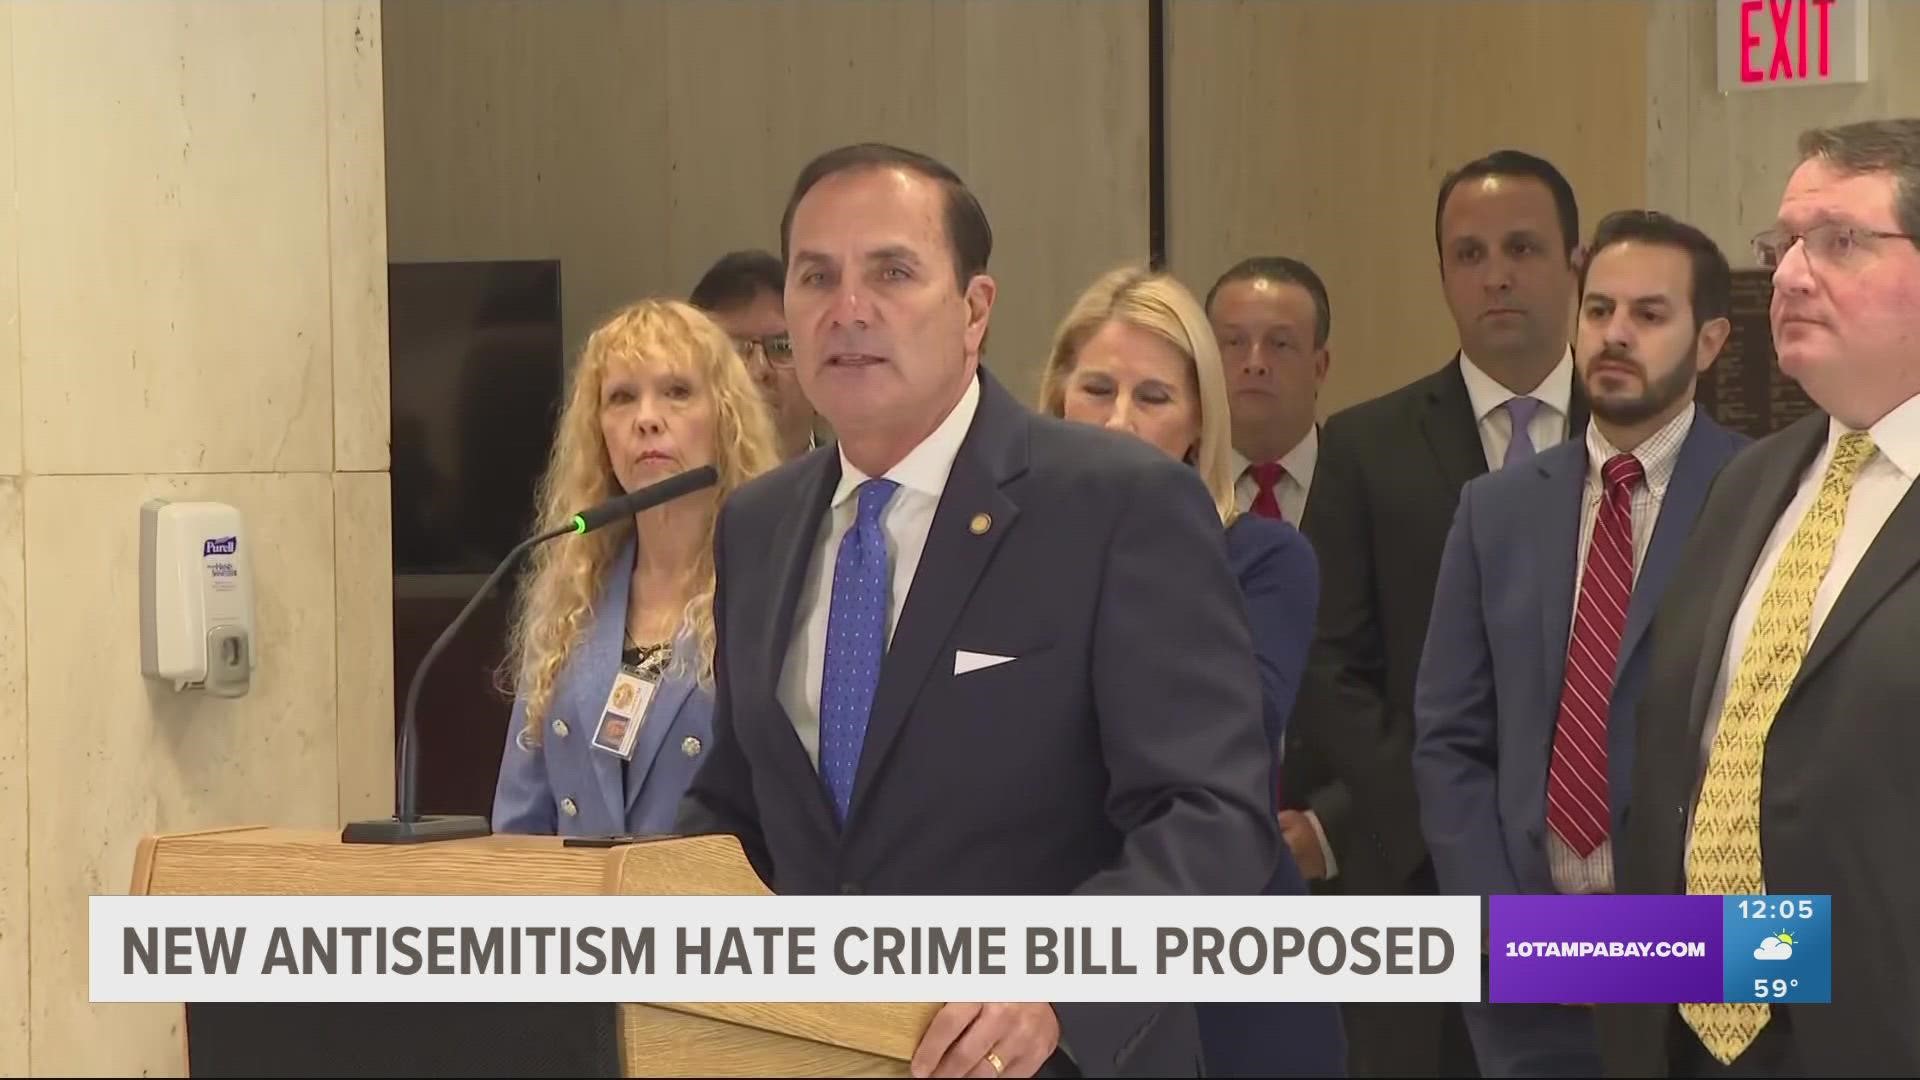 Florida State Rep. Mike Caruso alongside other state legislators announced the filing of HB269 Antisemitism Hate Crime Bill Thursday morning in Tallahassee.